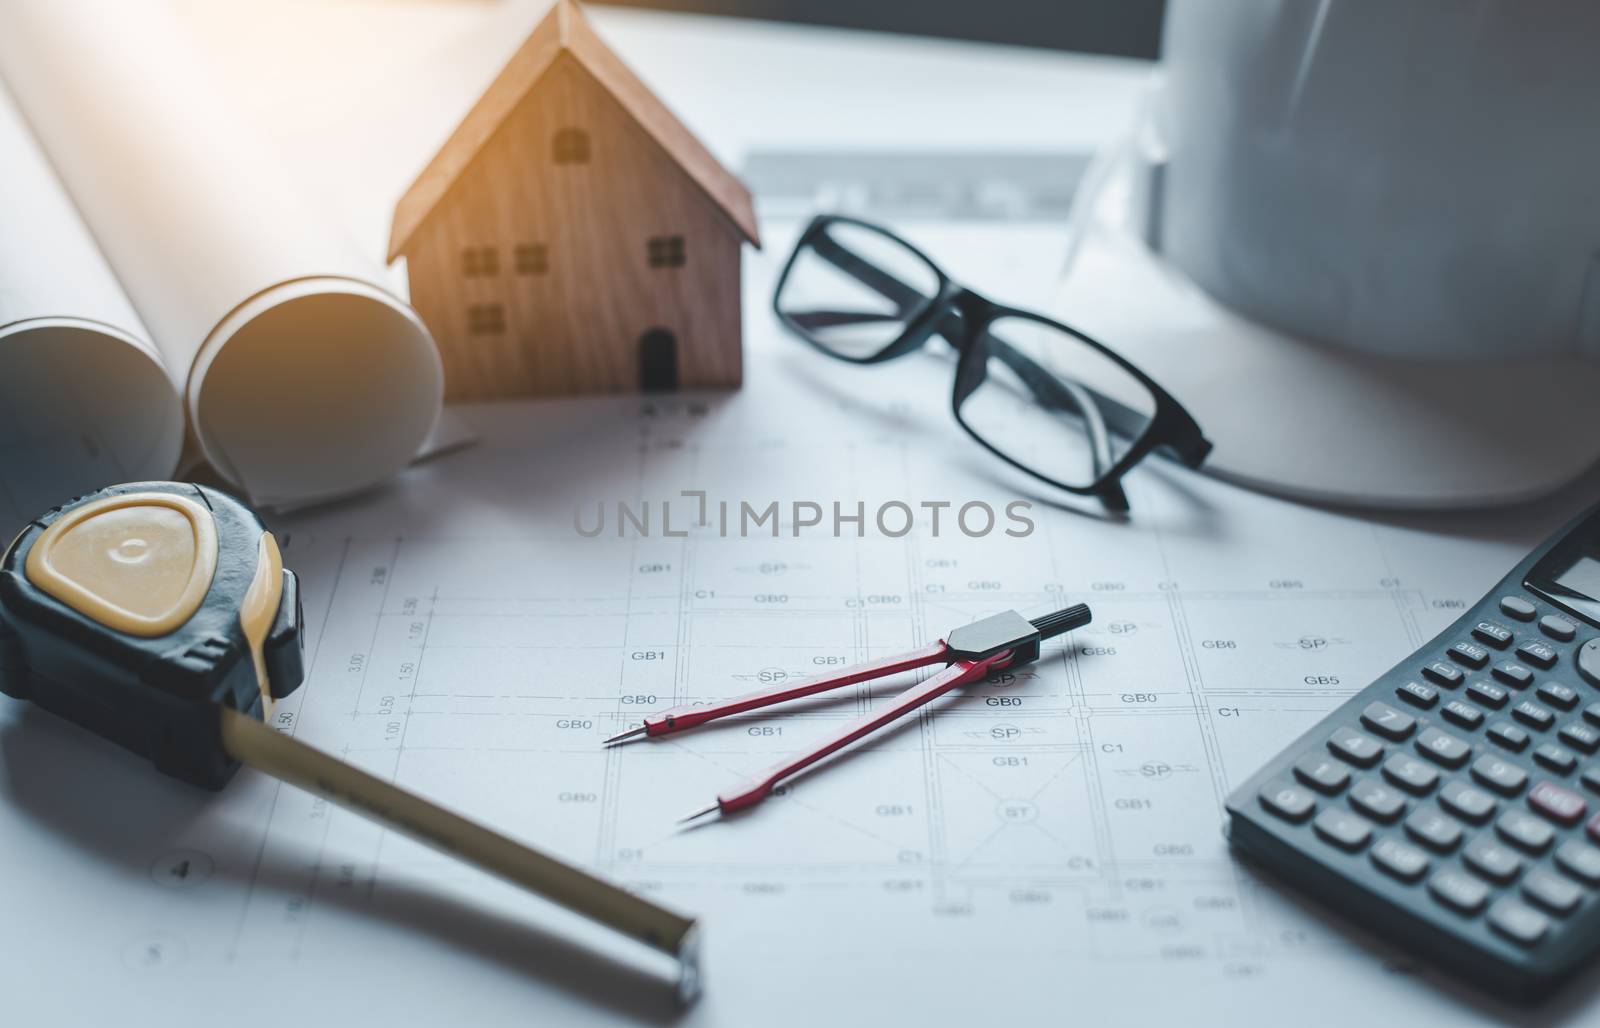  red dividers are placed on the work desk, with house plans desi by photobyphotoboy